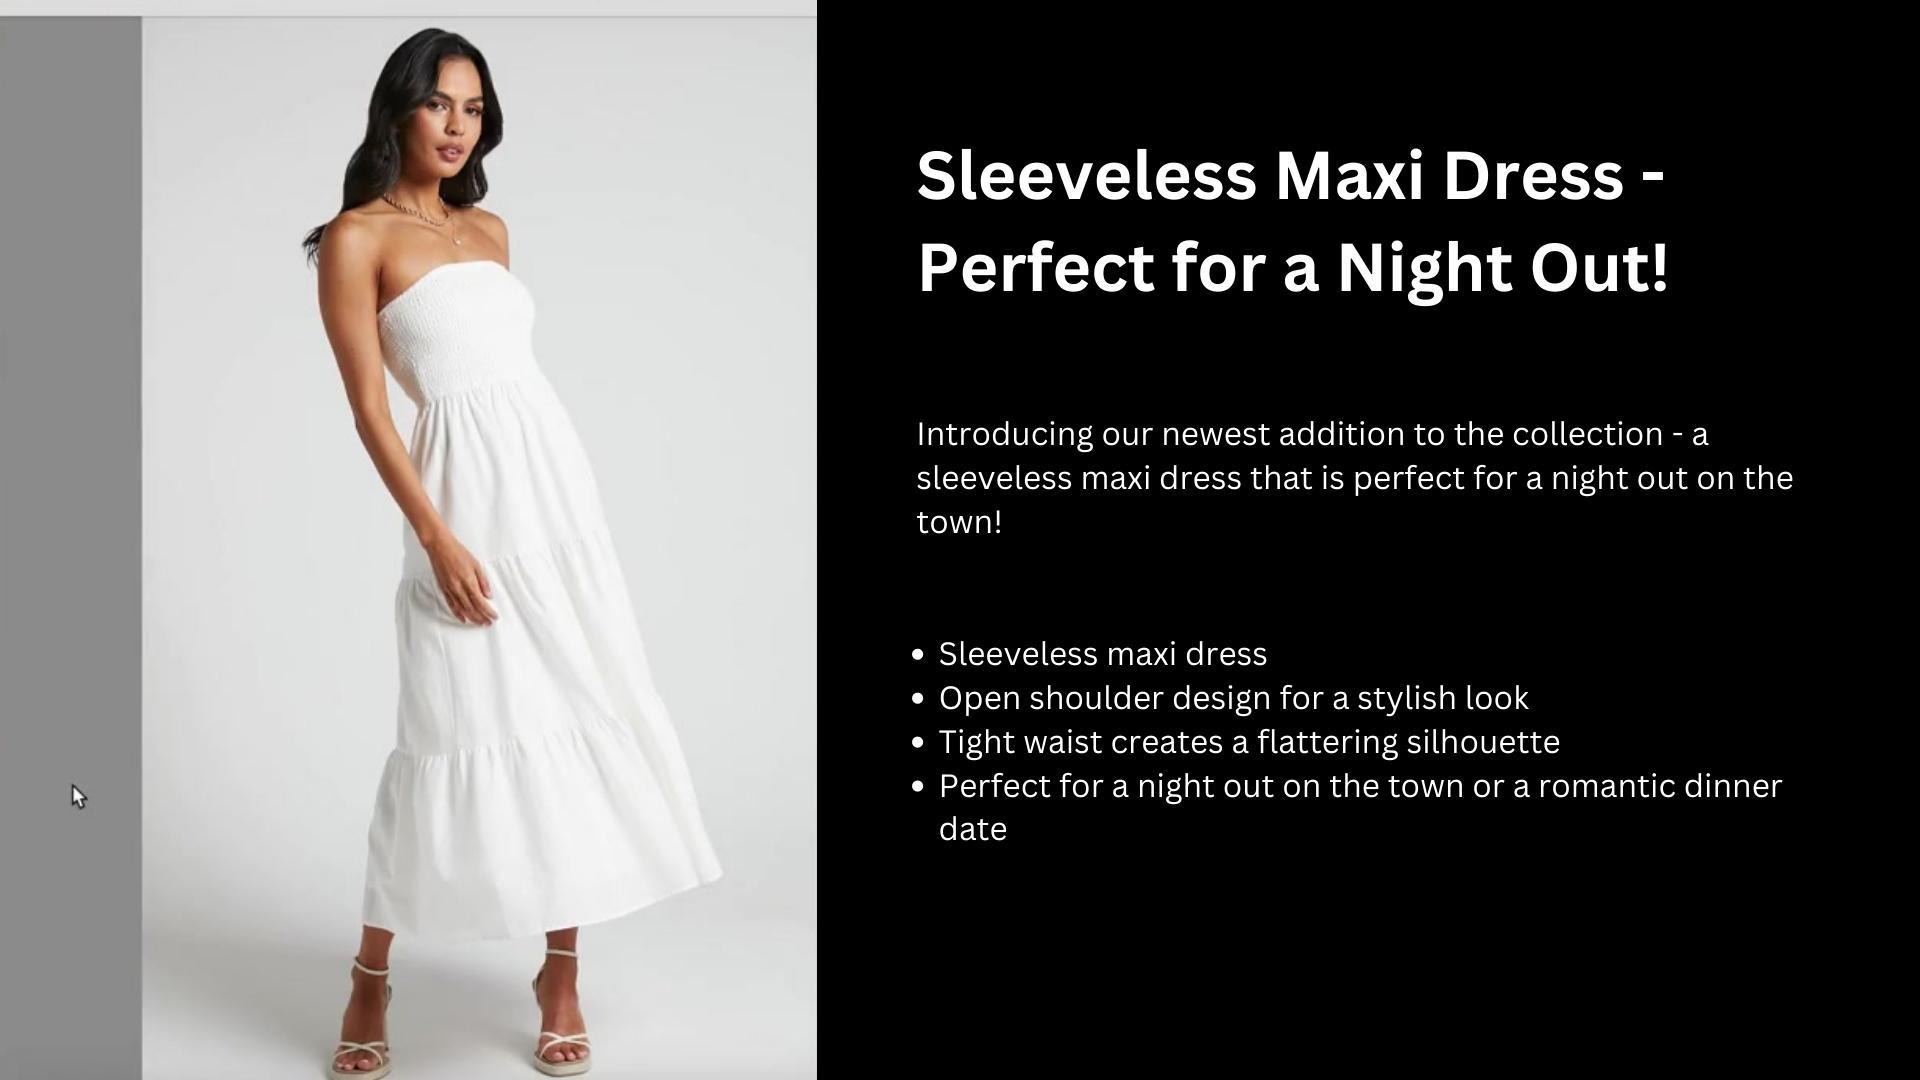 An AI-generated product description for a white sleeveless maxi dress